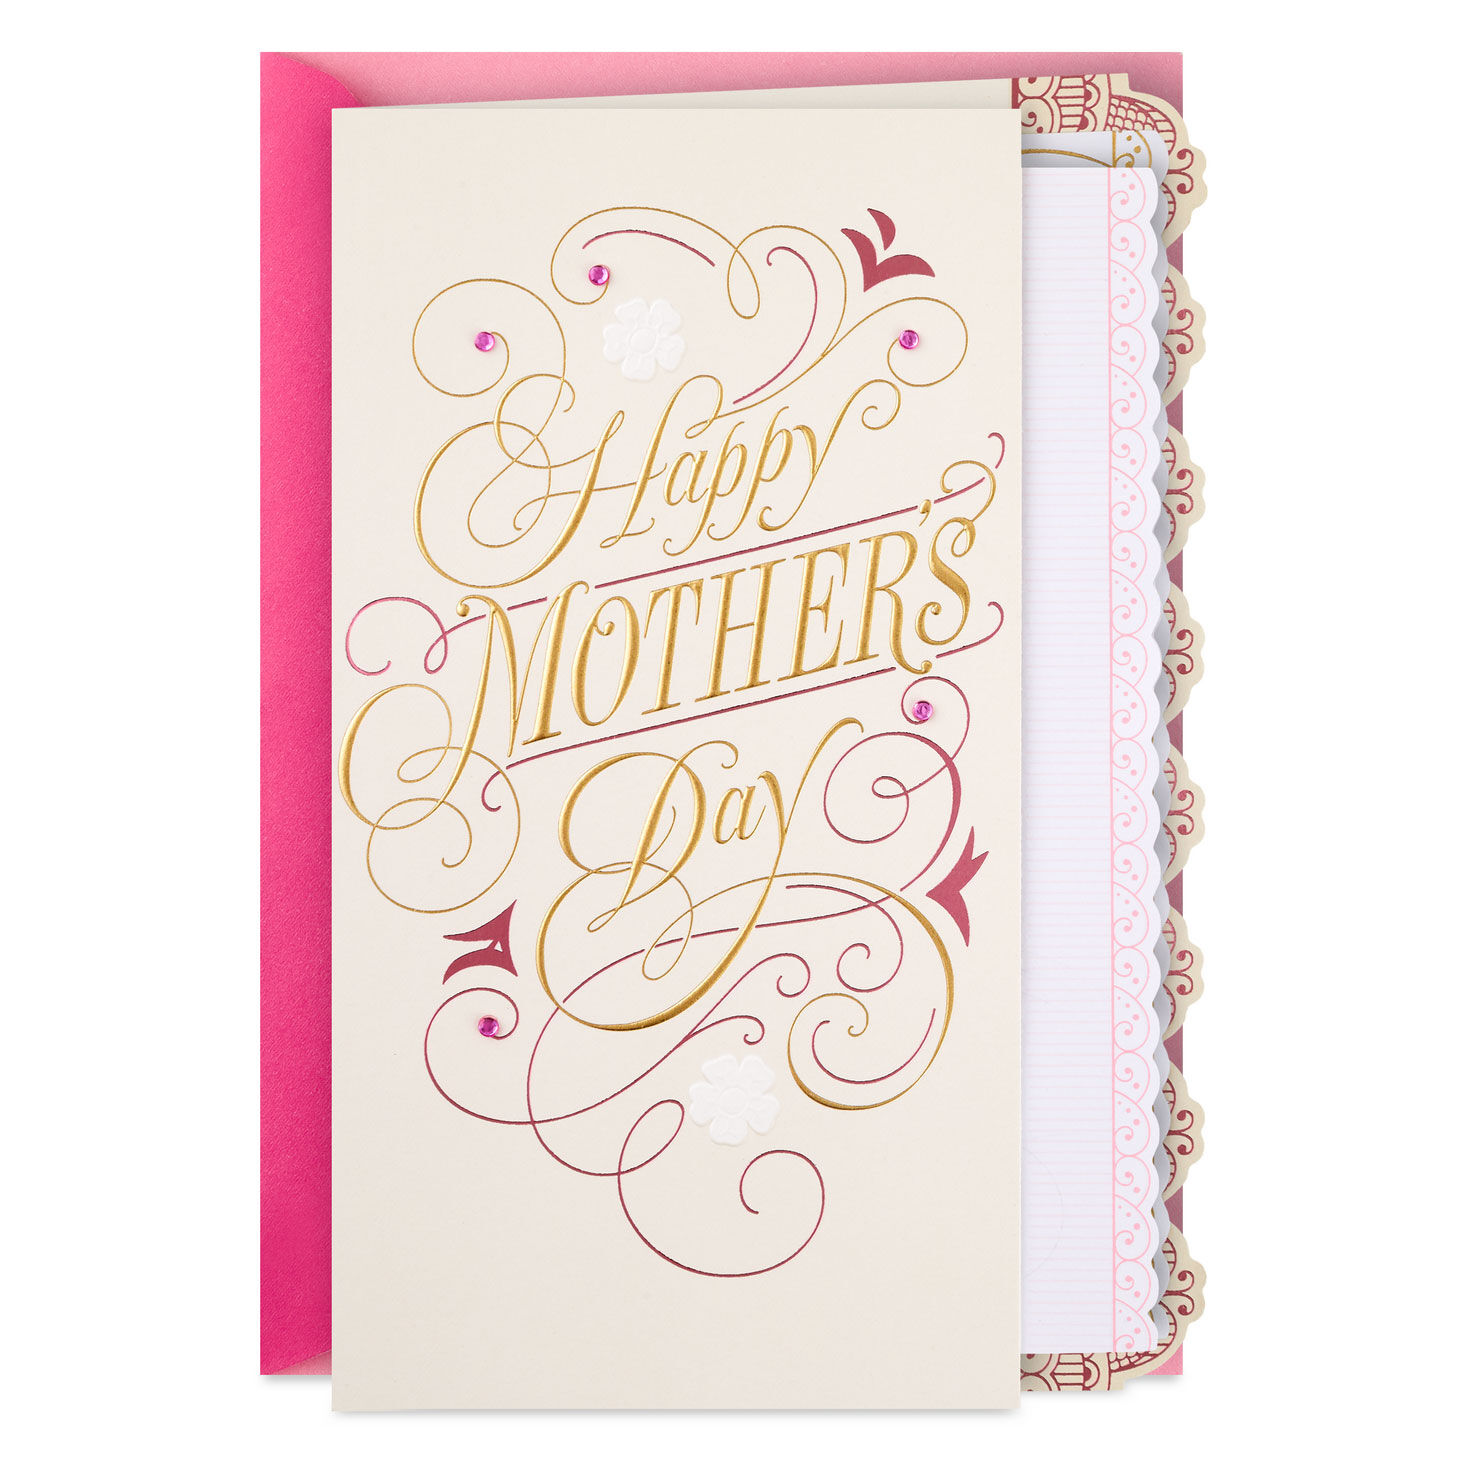 The World Needs More Moms Like You Mother's Day Card for only USD 6.99 | Hallmark